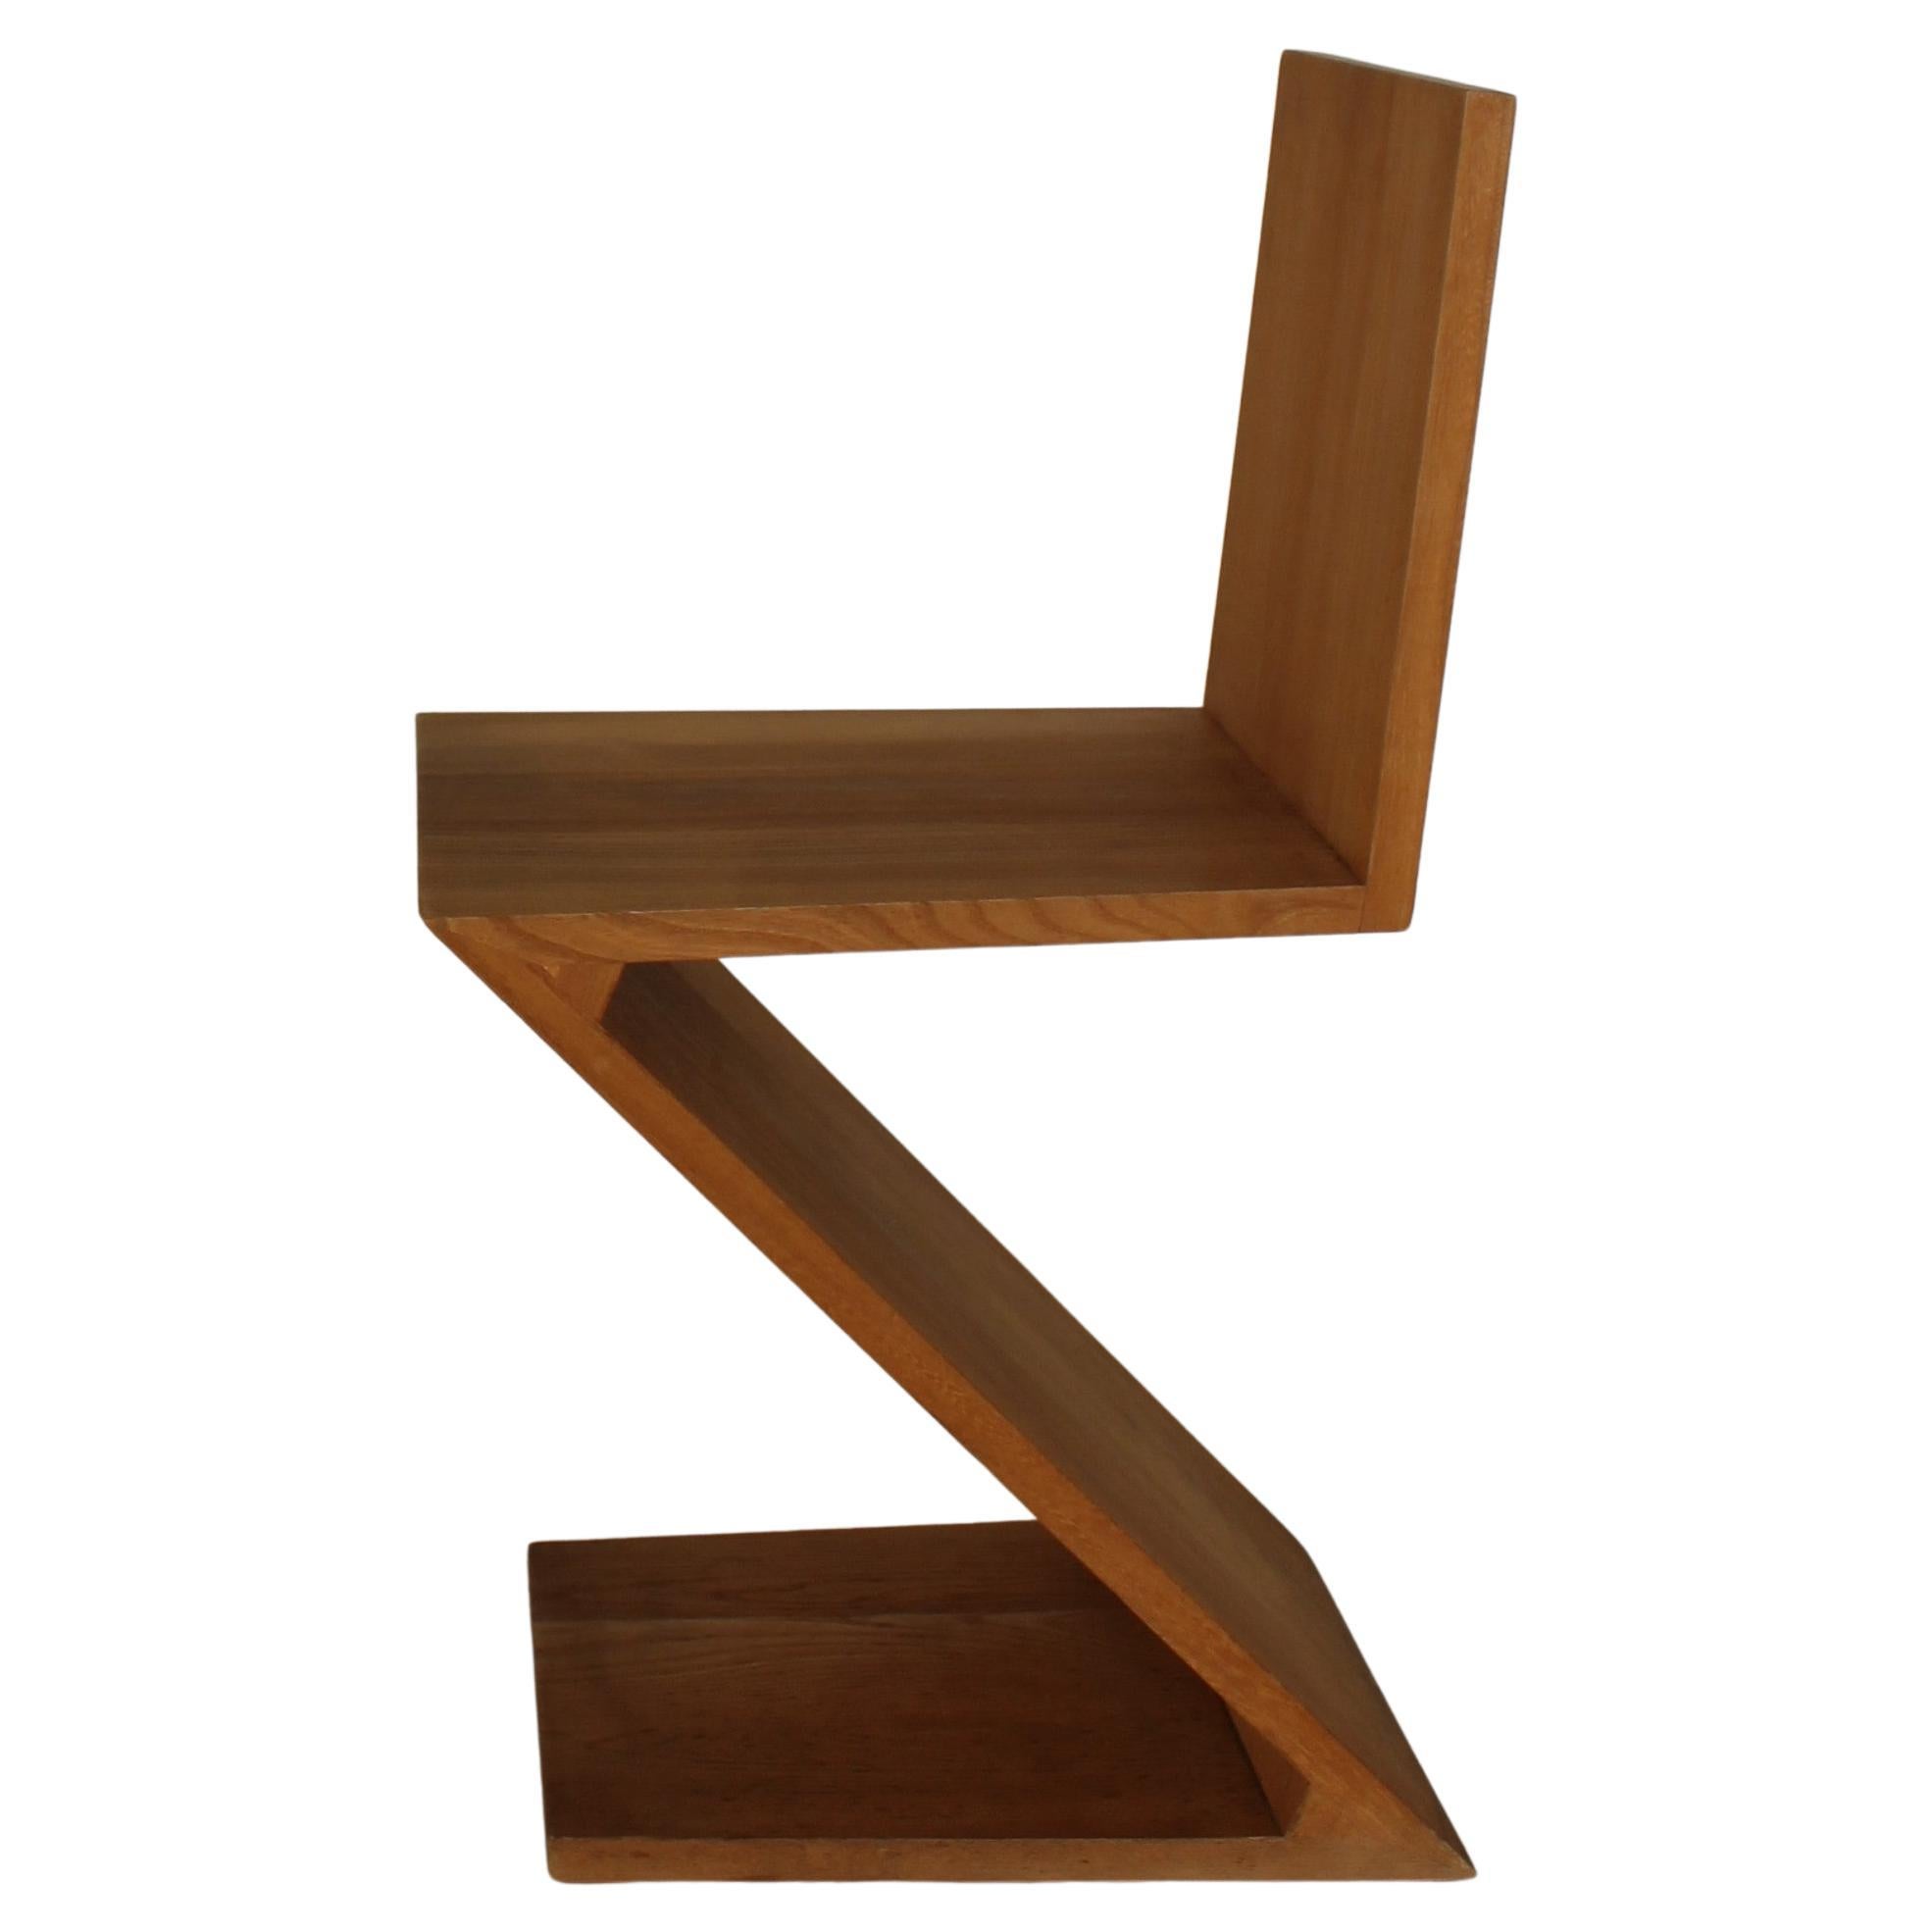  Gerrit Rietveld "Zig-Zag" Chair by Cassina n° 859, Italy 1973  For Sale